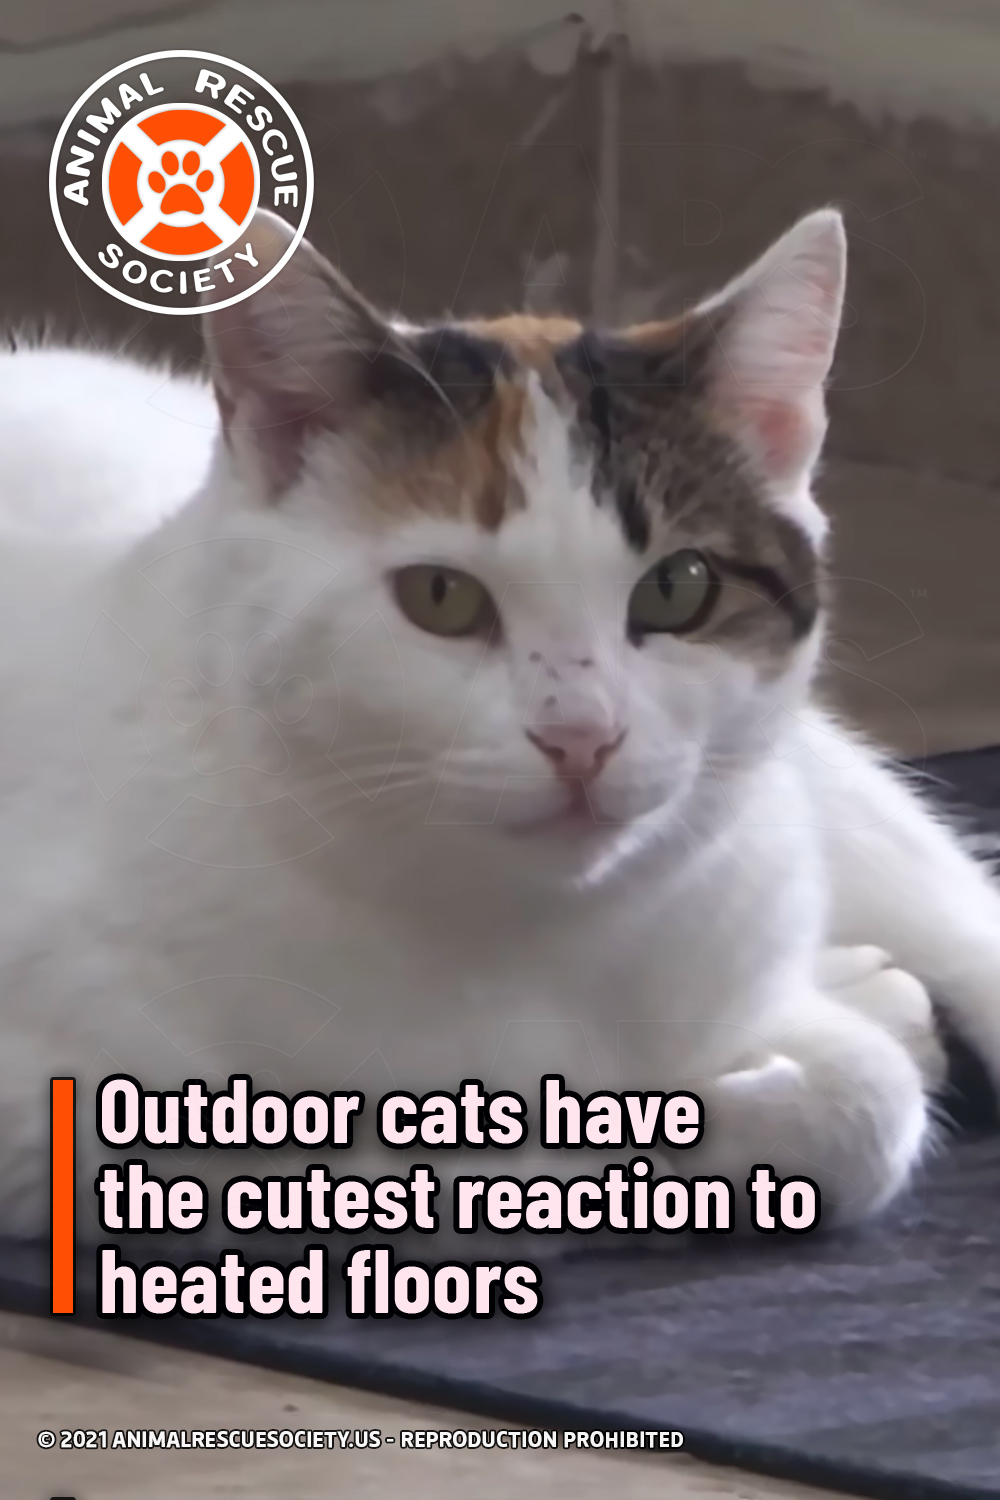 Outdoor cats have the cutest reaction to heated floors